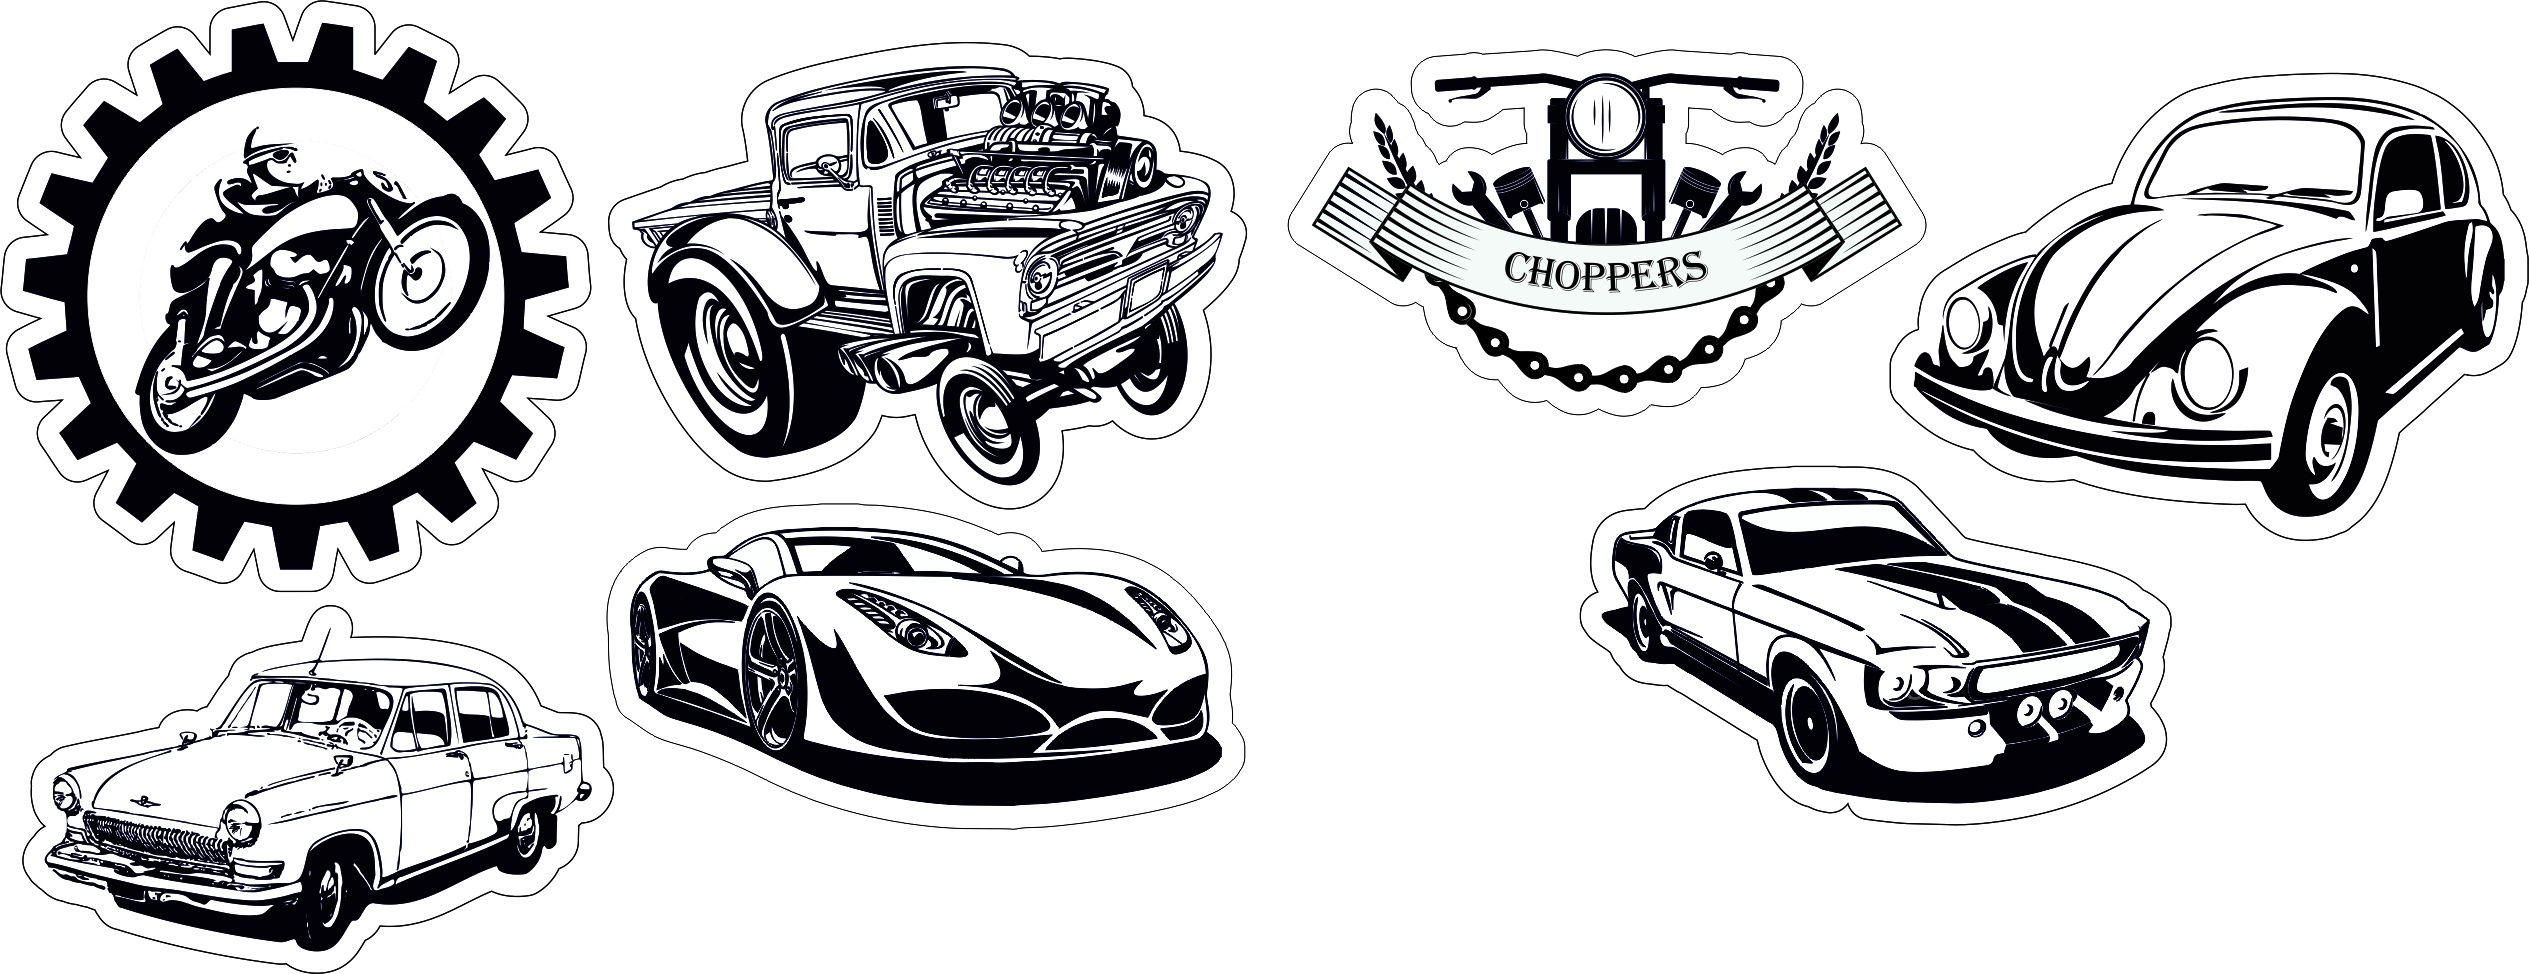 Cars sticker Vectors & Illustrations for Free Download